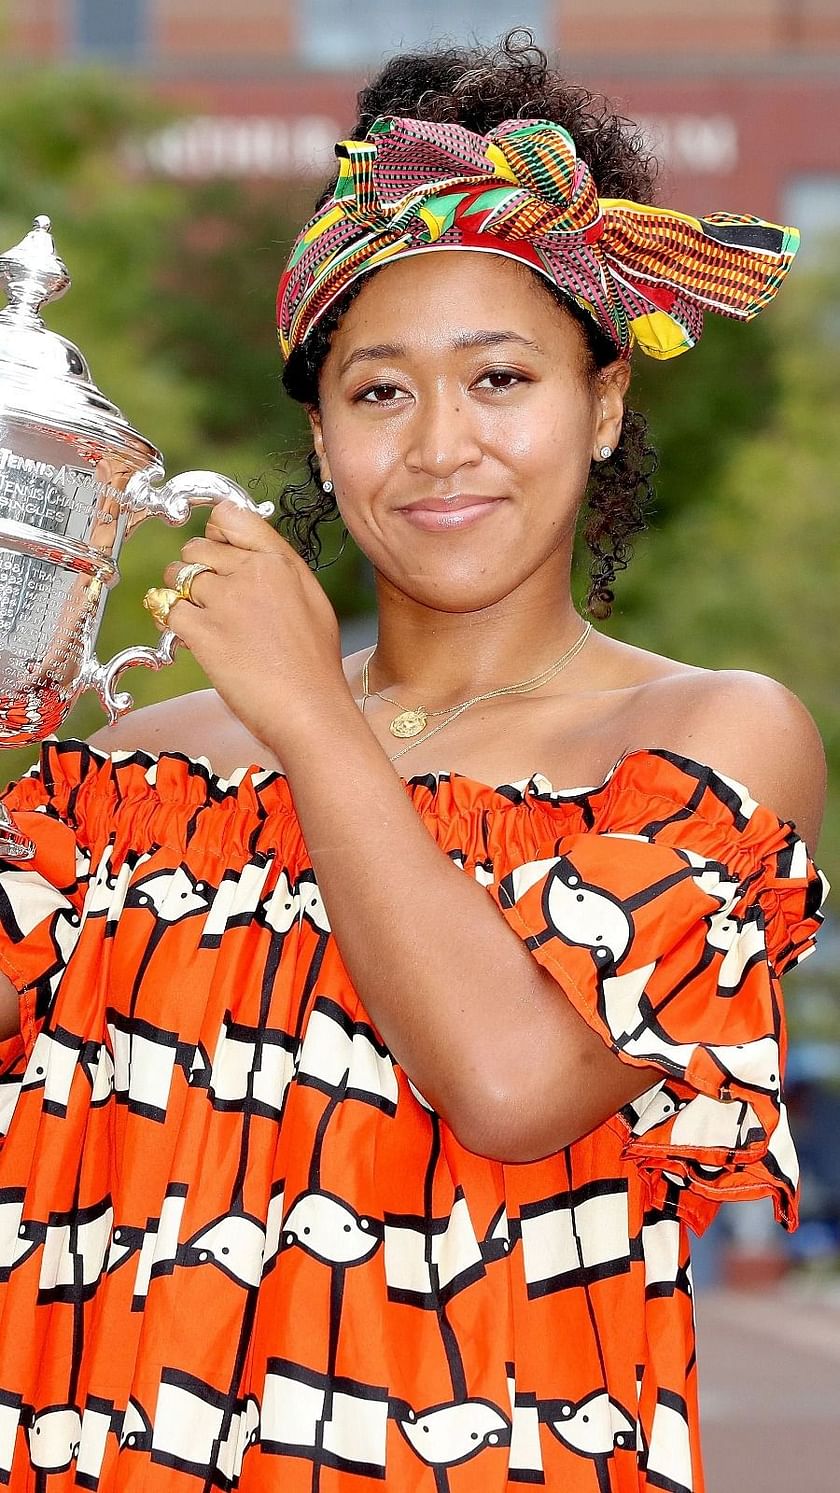 Naomi Osaka Is The Newest Face Of Louis Vuitton